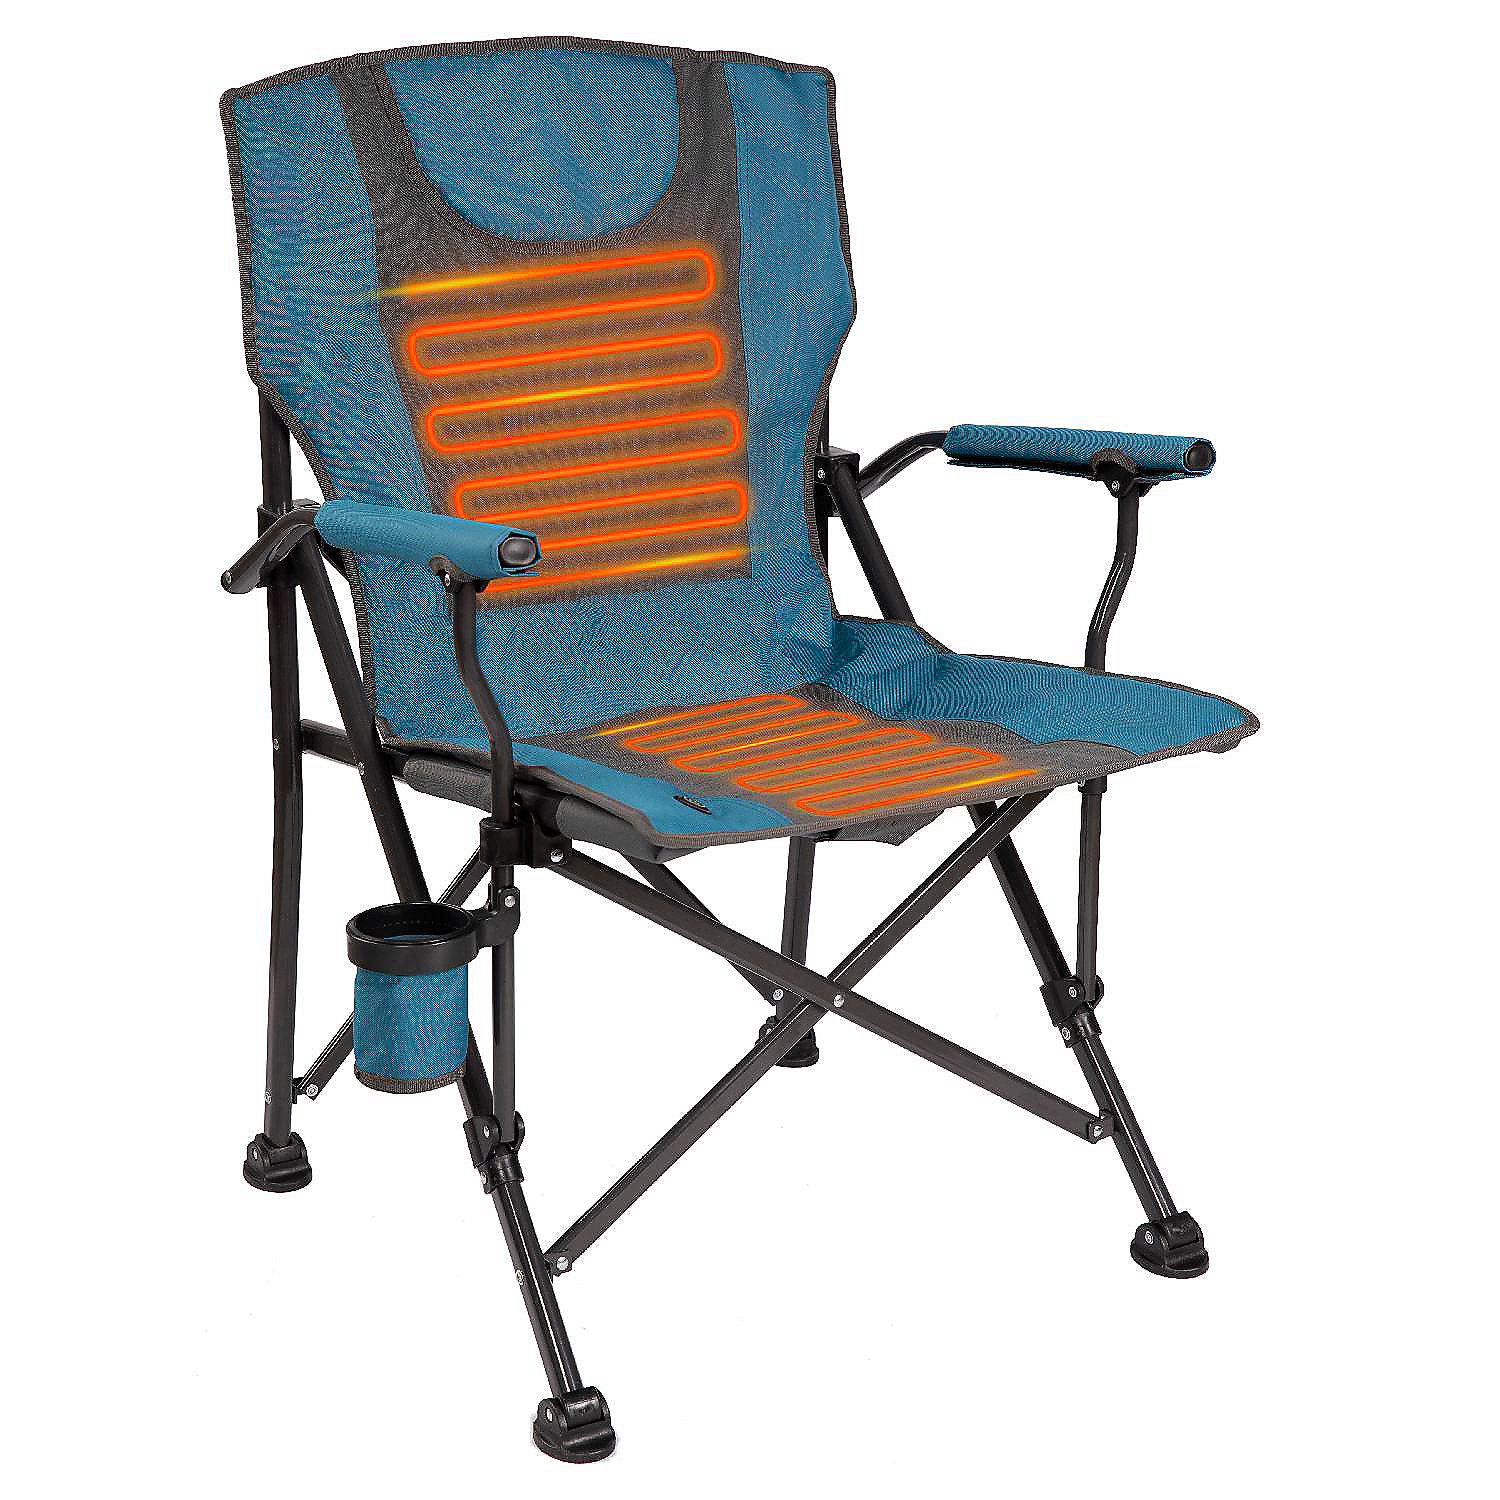 wetgeving gedragen Reflectie Backyard Expressions Luxury Heated Portable Camp Chair - Blue/Grey - Great  for Camping, Sports and the Beach